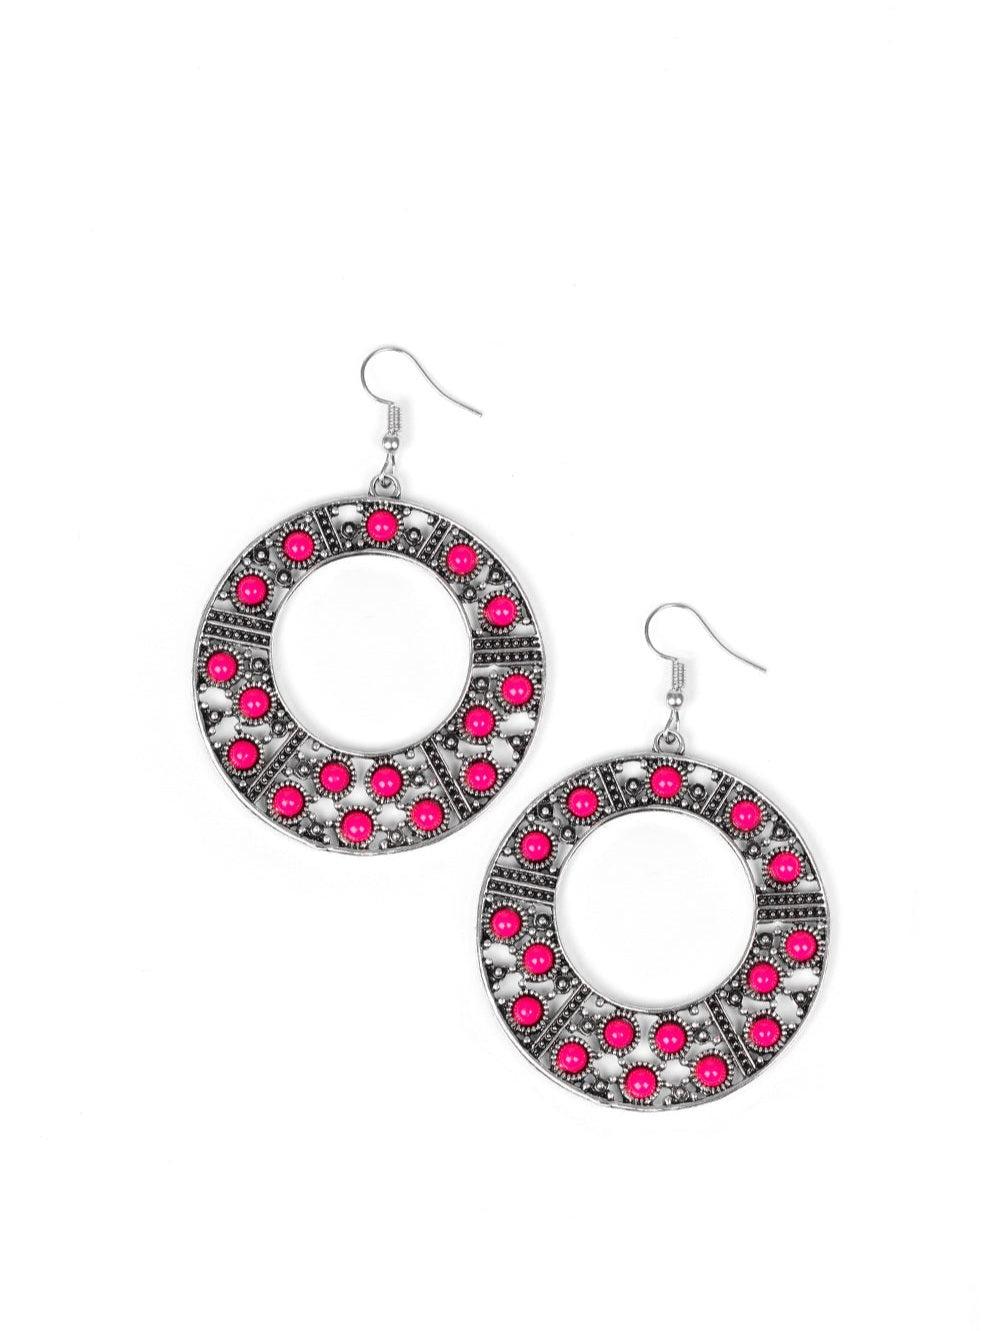 San Diego Samba - Pink and Silver Earrings - Paparazzi Accessories - Bejeweled Accessories By Kristie - Flirtatious pink beads are sprinkled across a shimmery silver hoop radiating with dainty silver studs, creating a whimsical frame. Earring attaches to a standard fishhook fitting. Sold as one pair of earrings.